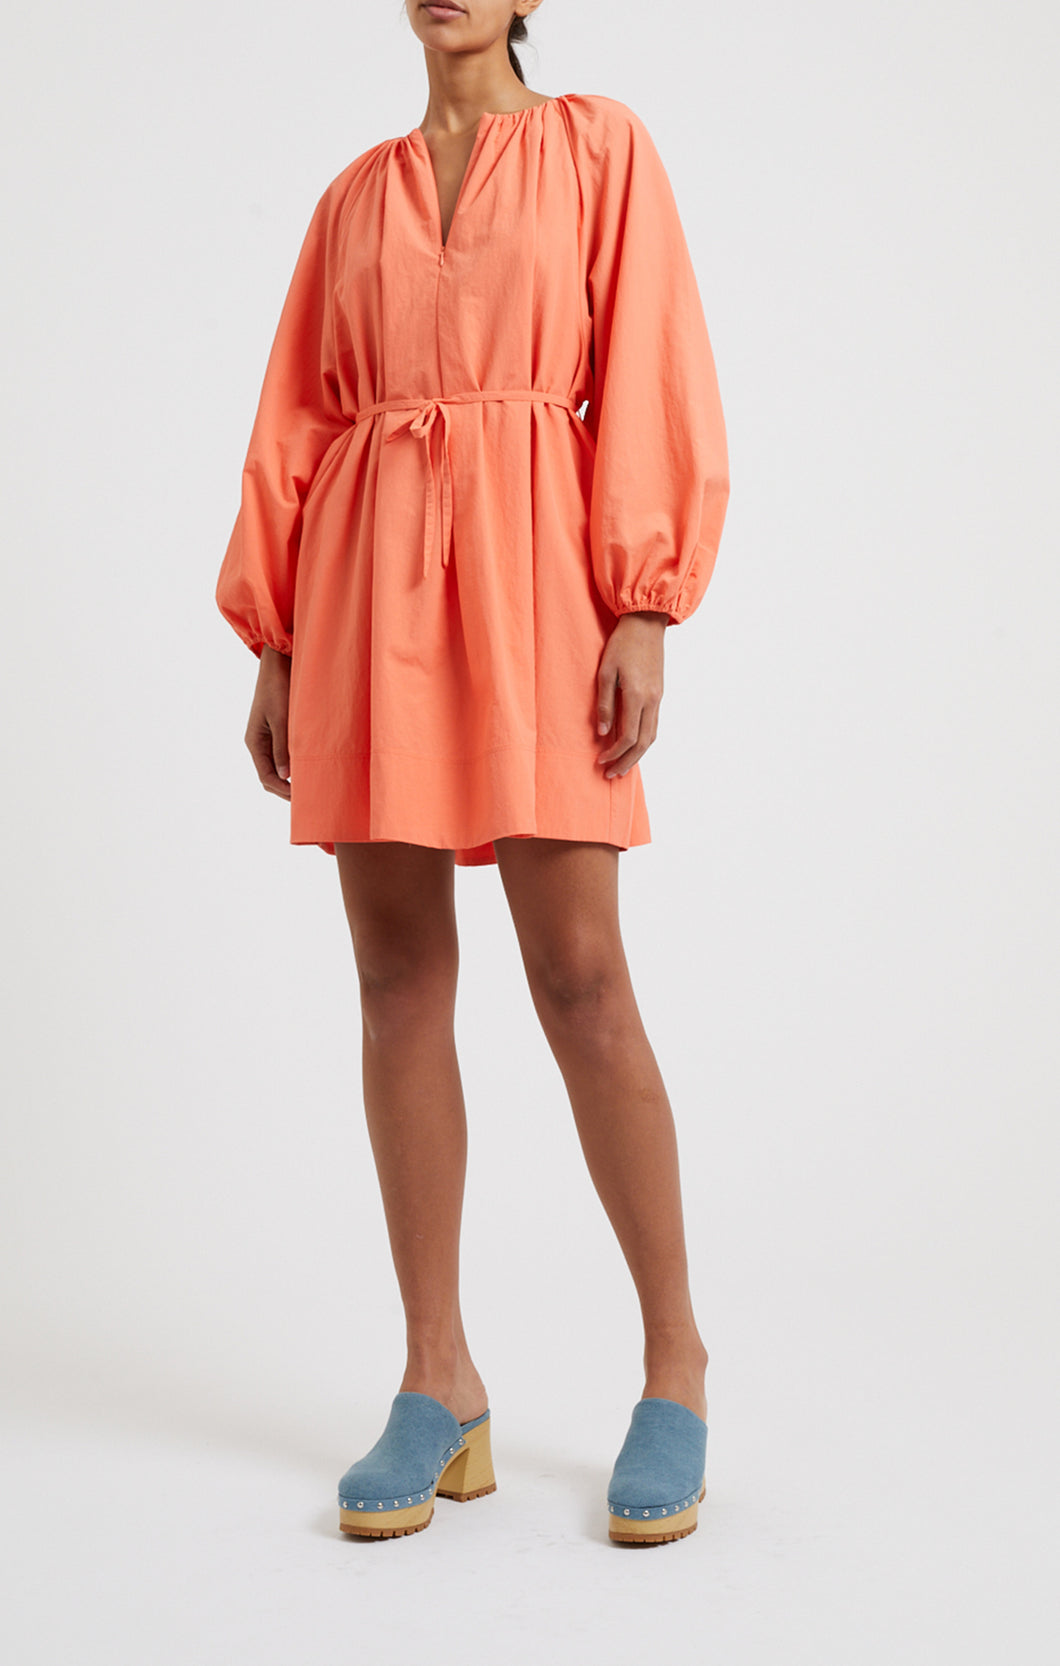 French Connection - Alora Dress in Coral